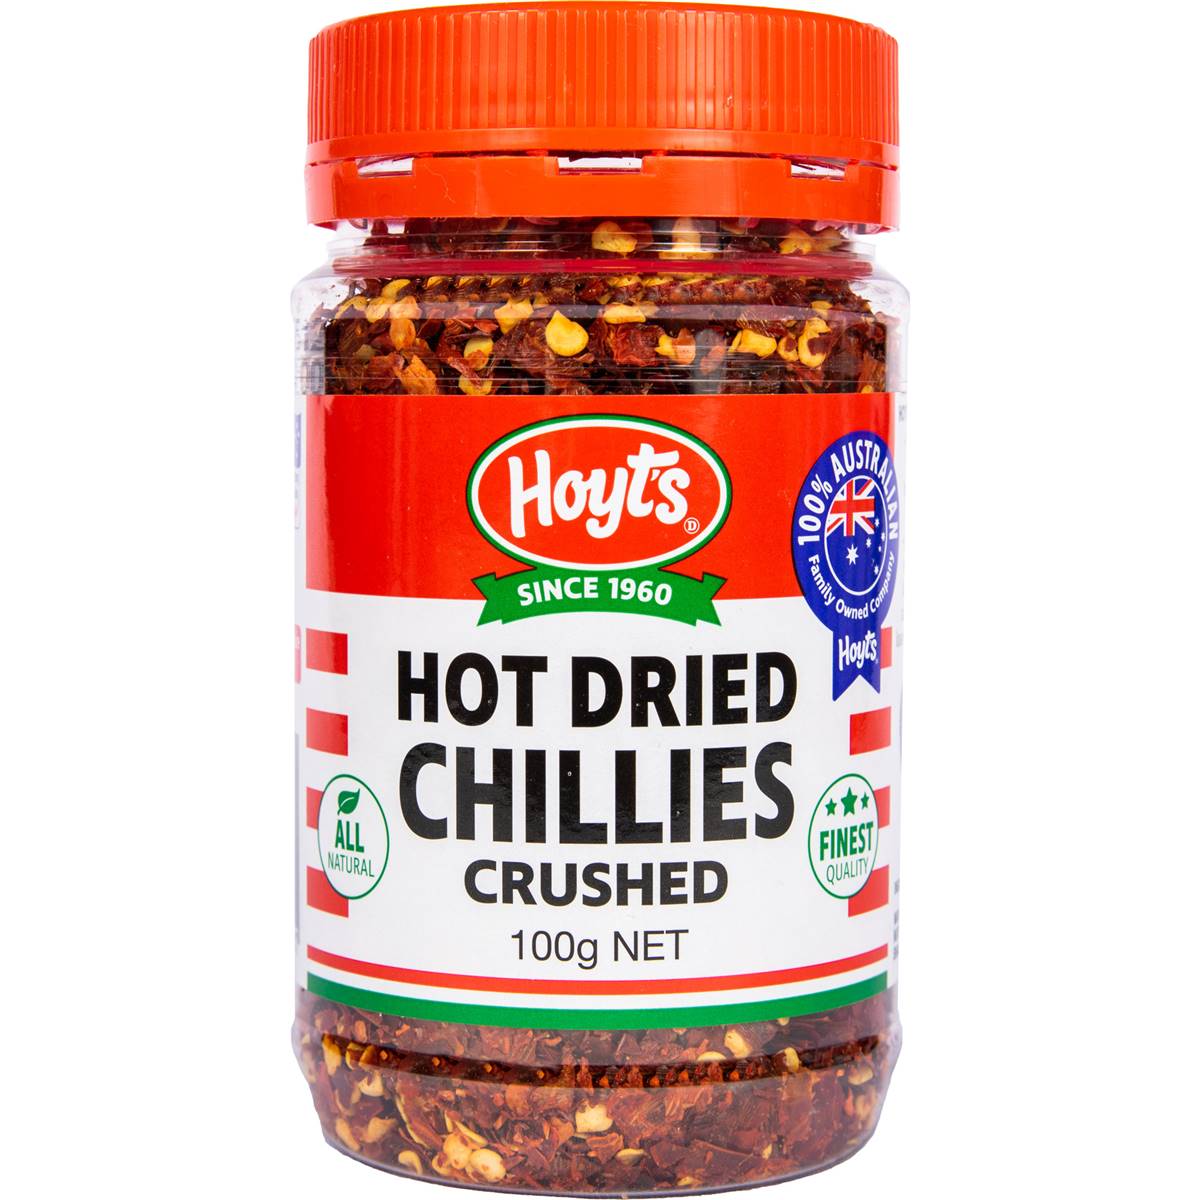 Calories in Hoyts Chilli Dried Crushed